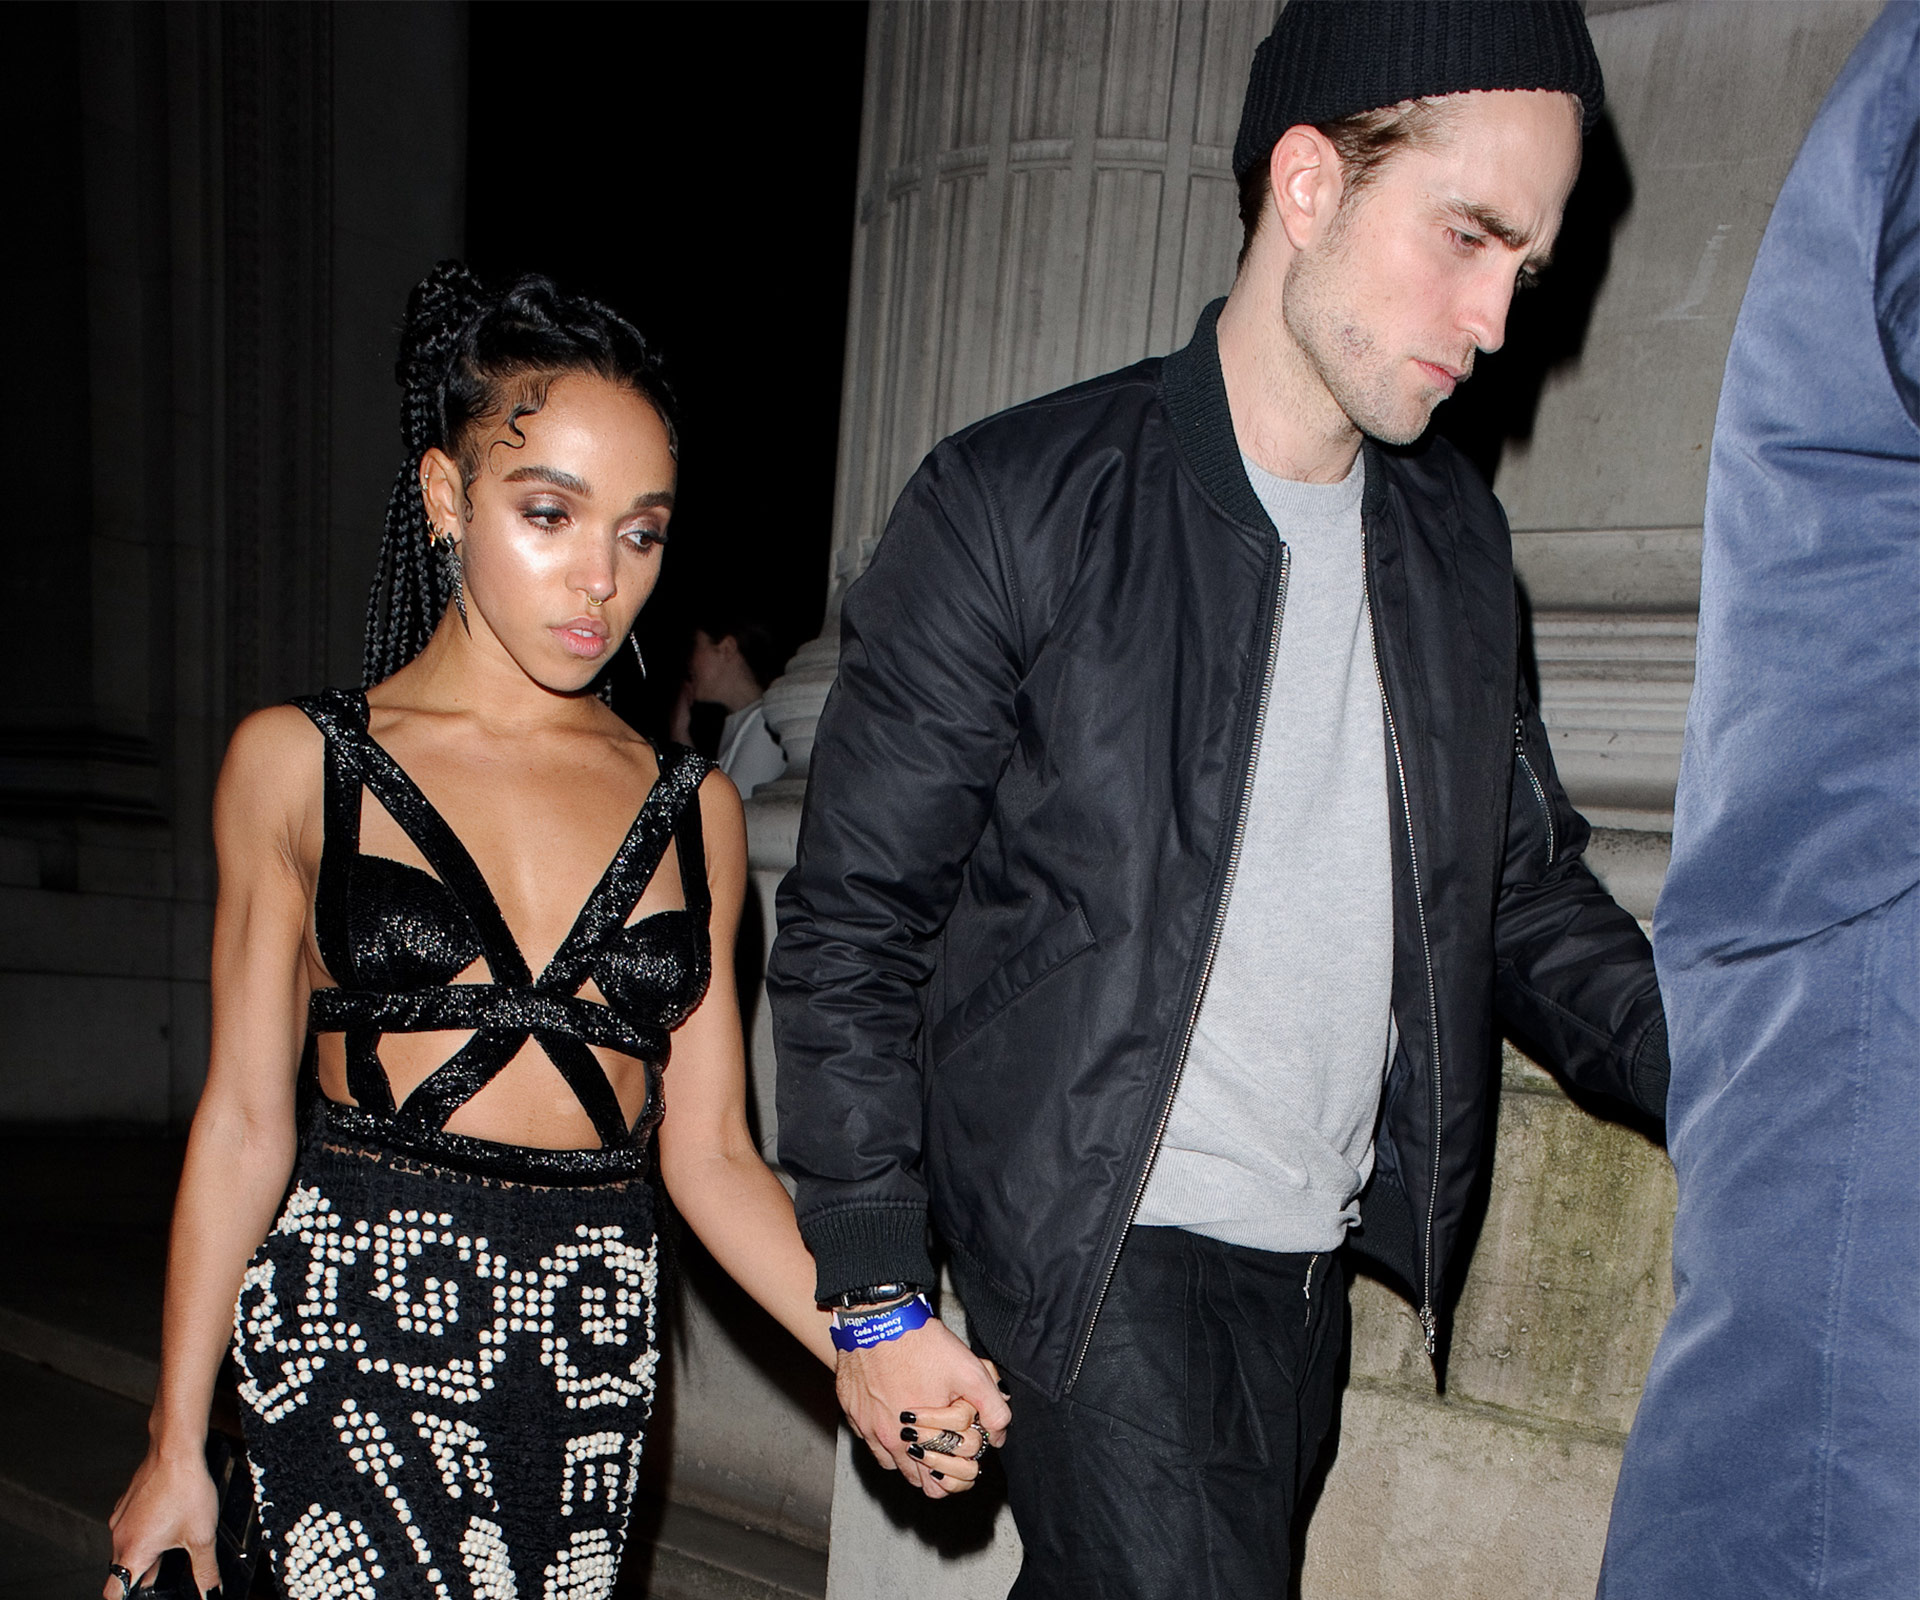 Are Robert Pattinson and FKA Twigs engaged?